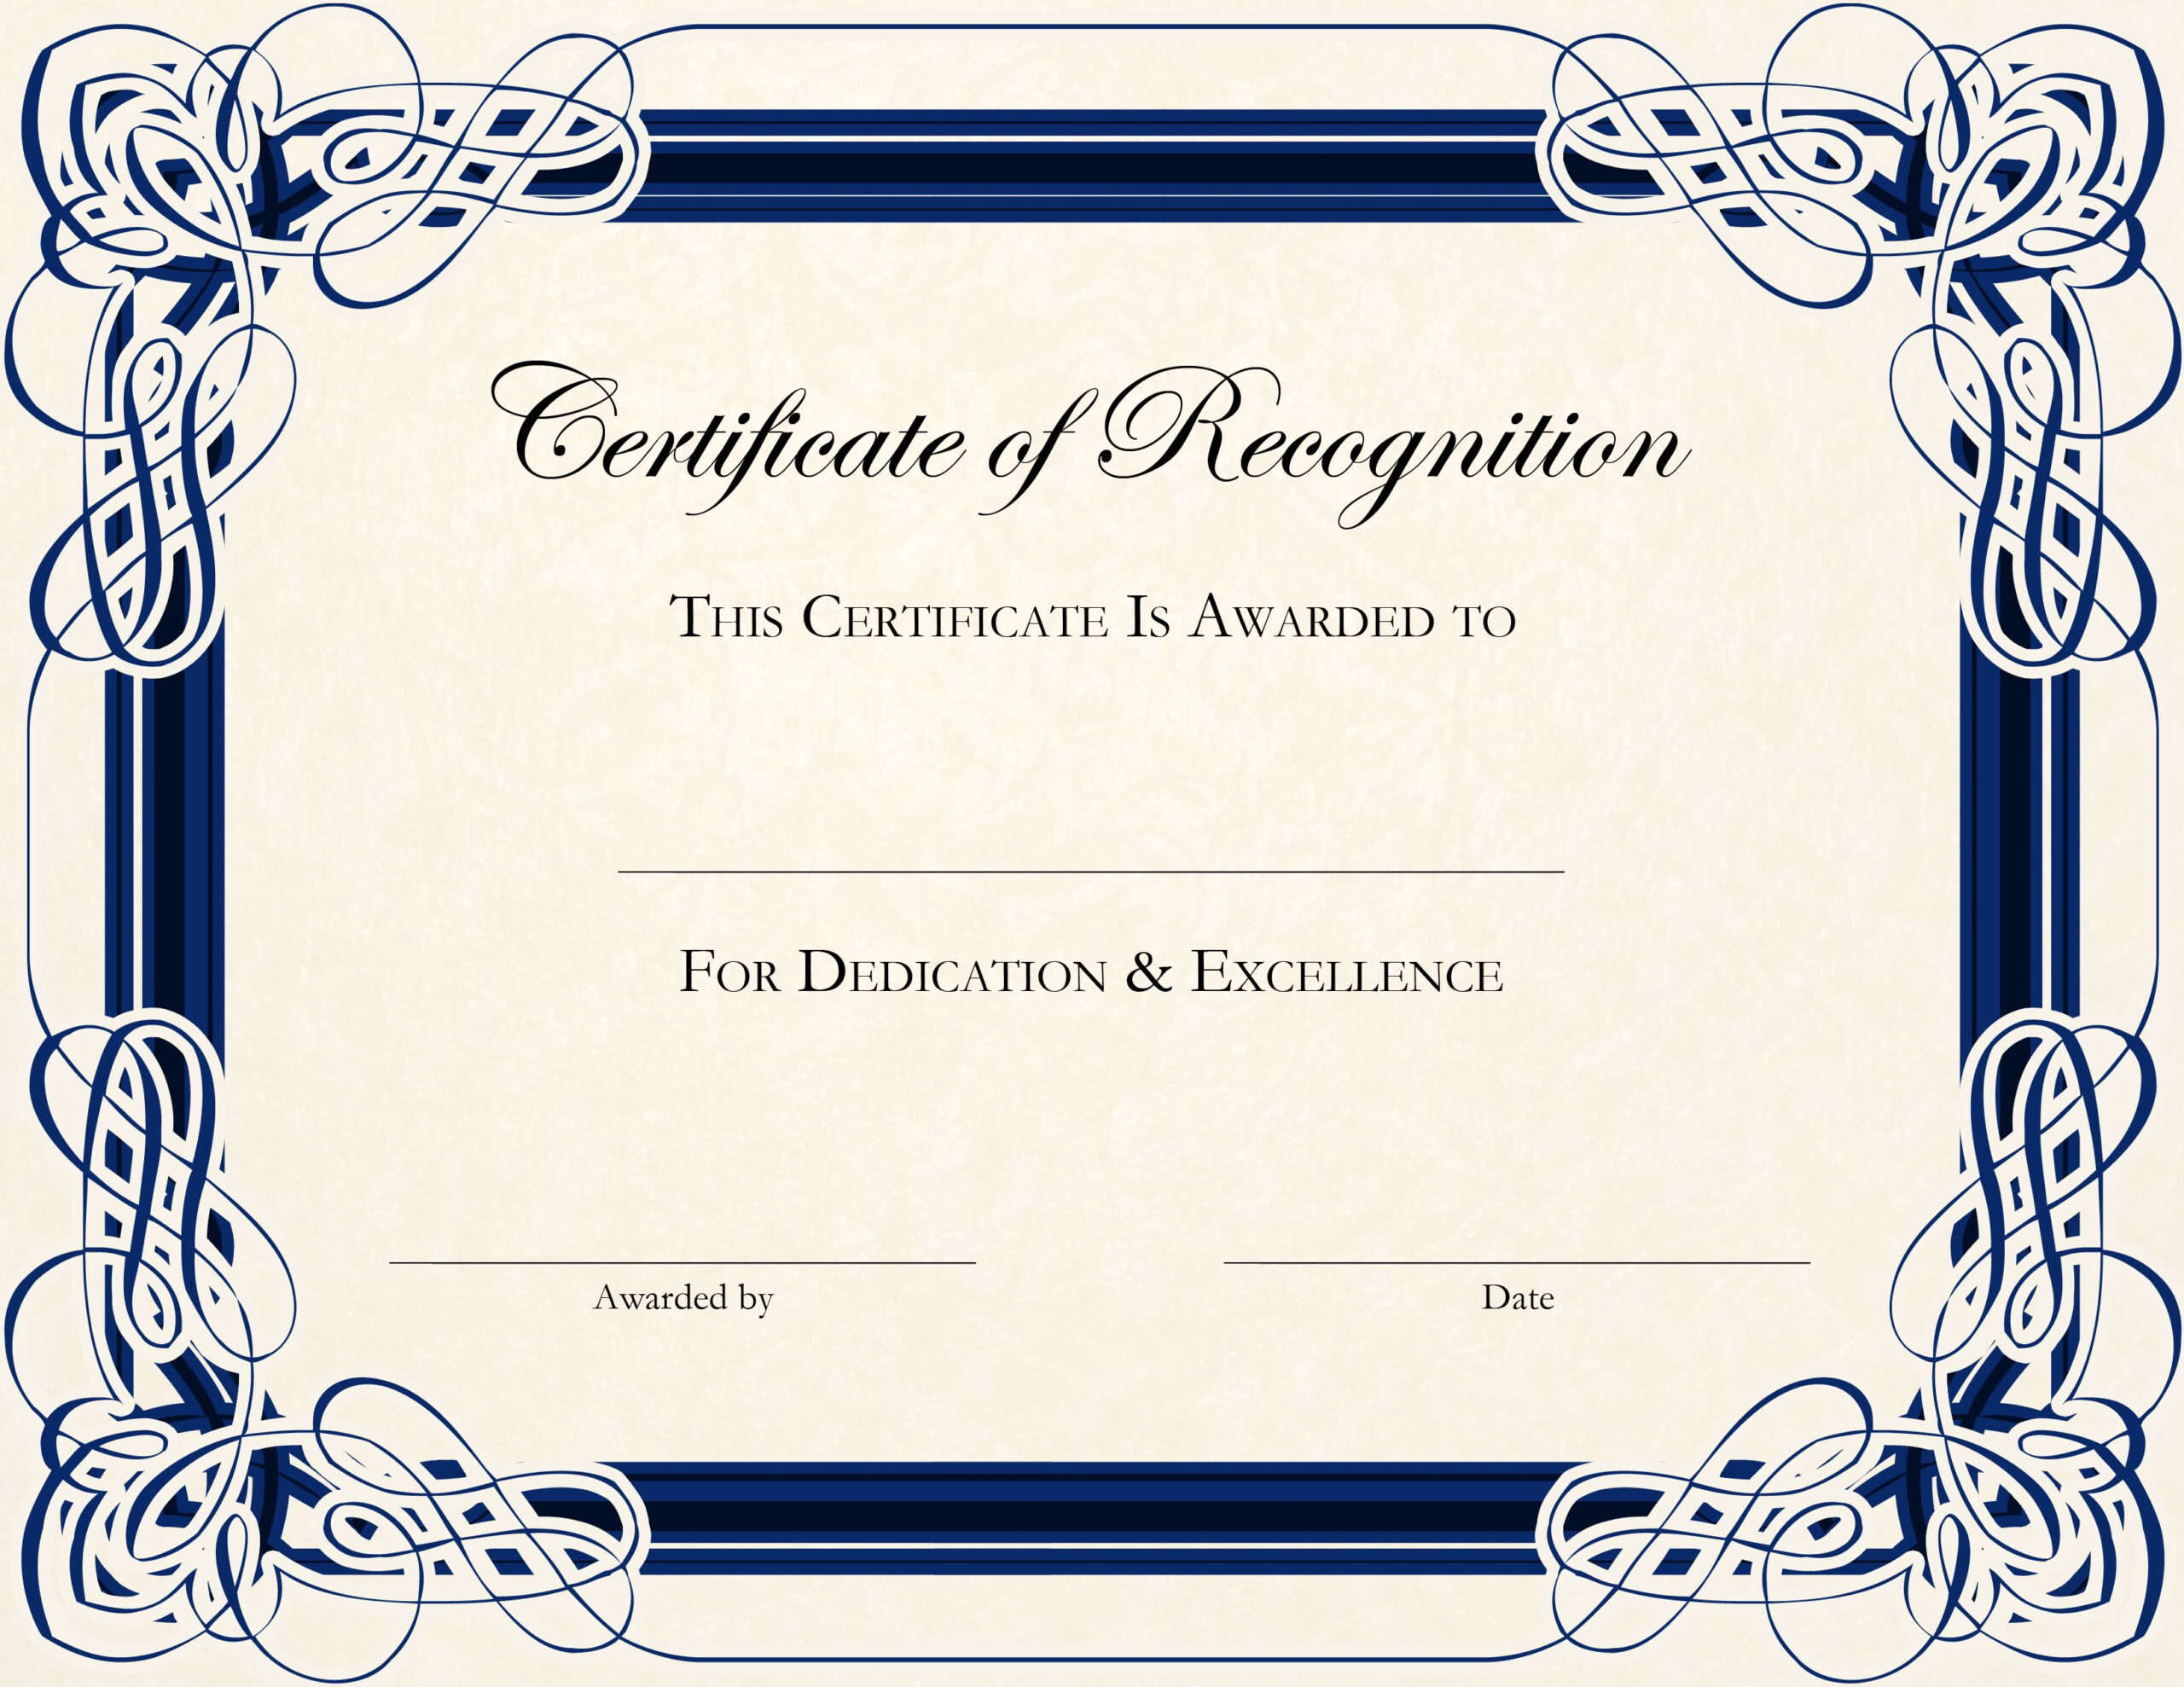 Certificate Of Appreciation Images | Crazy Gallery | Certificate Of pertaining to Amazing Blank Certificate Of Achievement Template